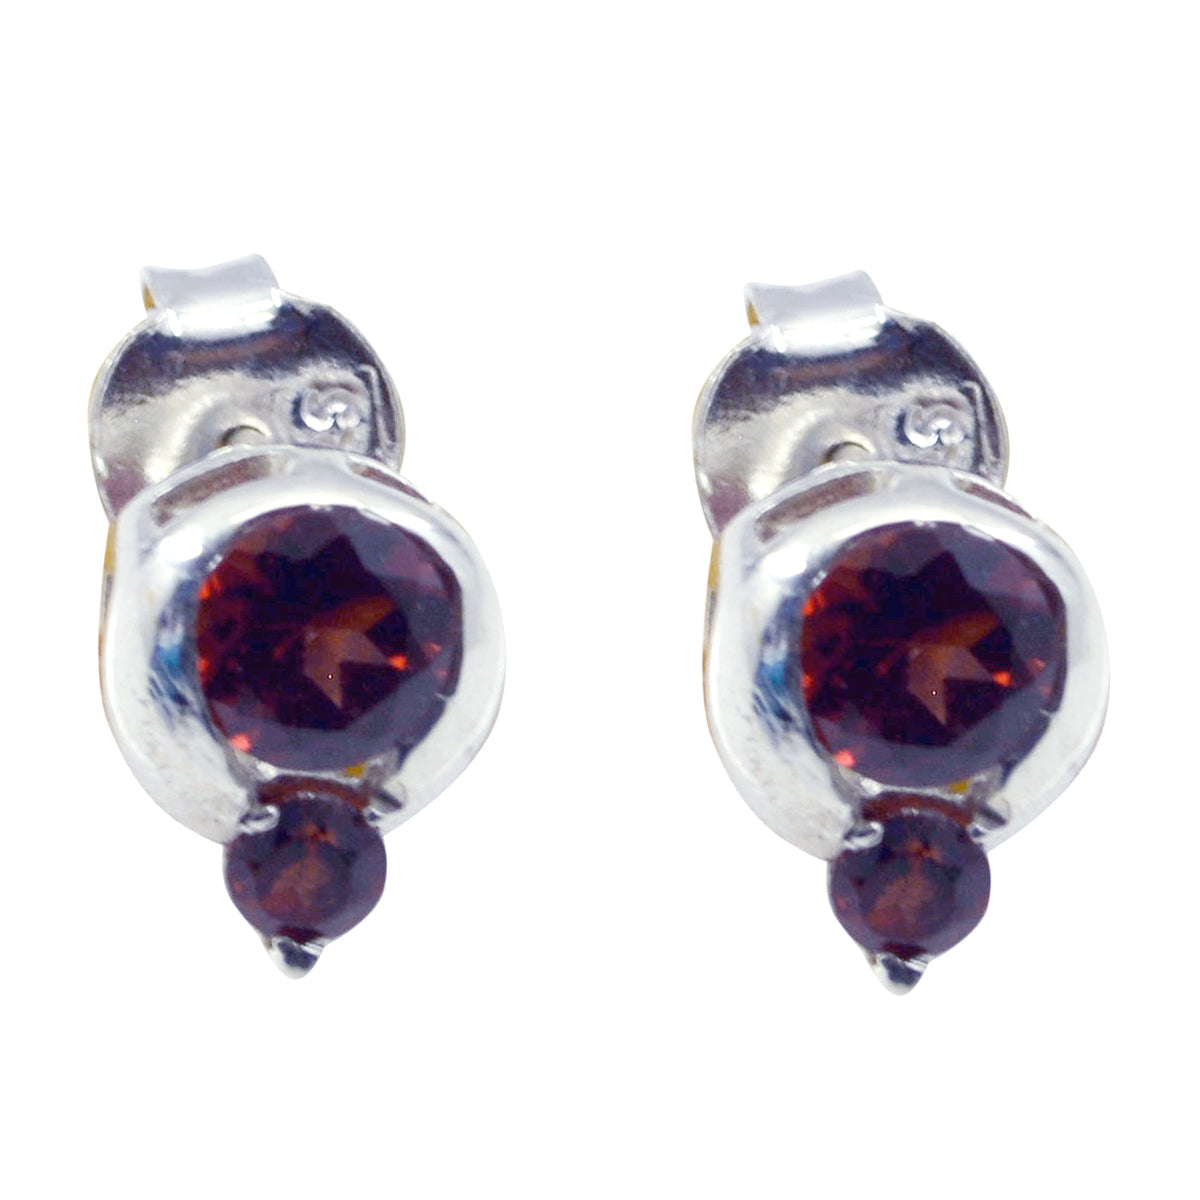 Riyo Natural Gemstone round Faceted Red Garnet Silver Earring gift for teacher's day